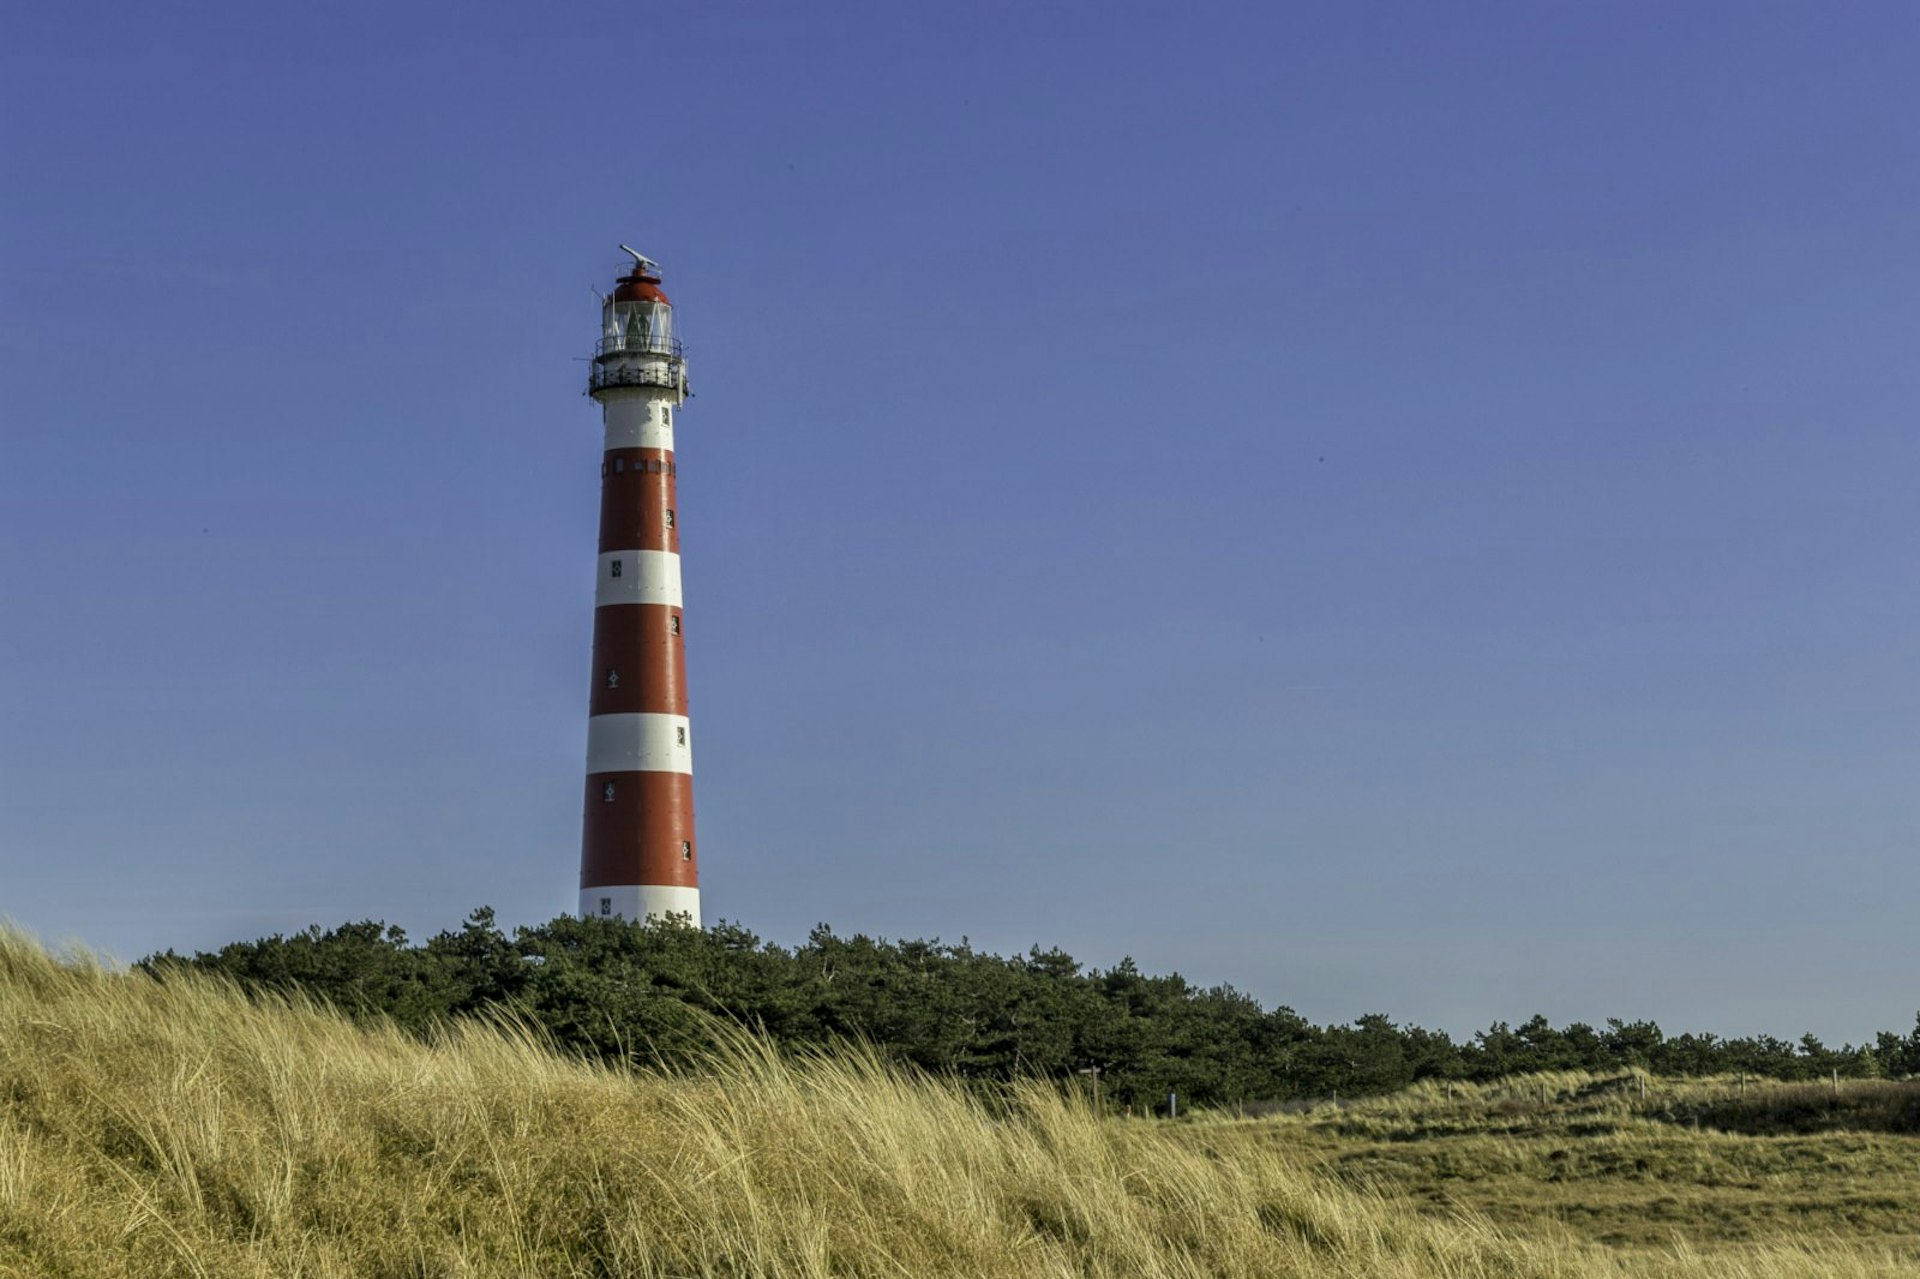 The red and white Ameland Lighthouse in the Netherlands stands against a blue sky